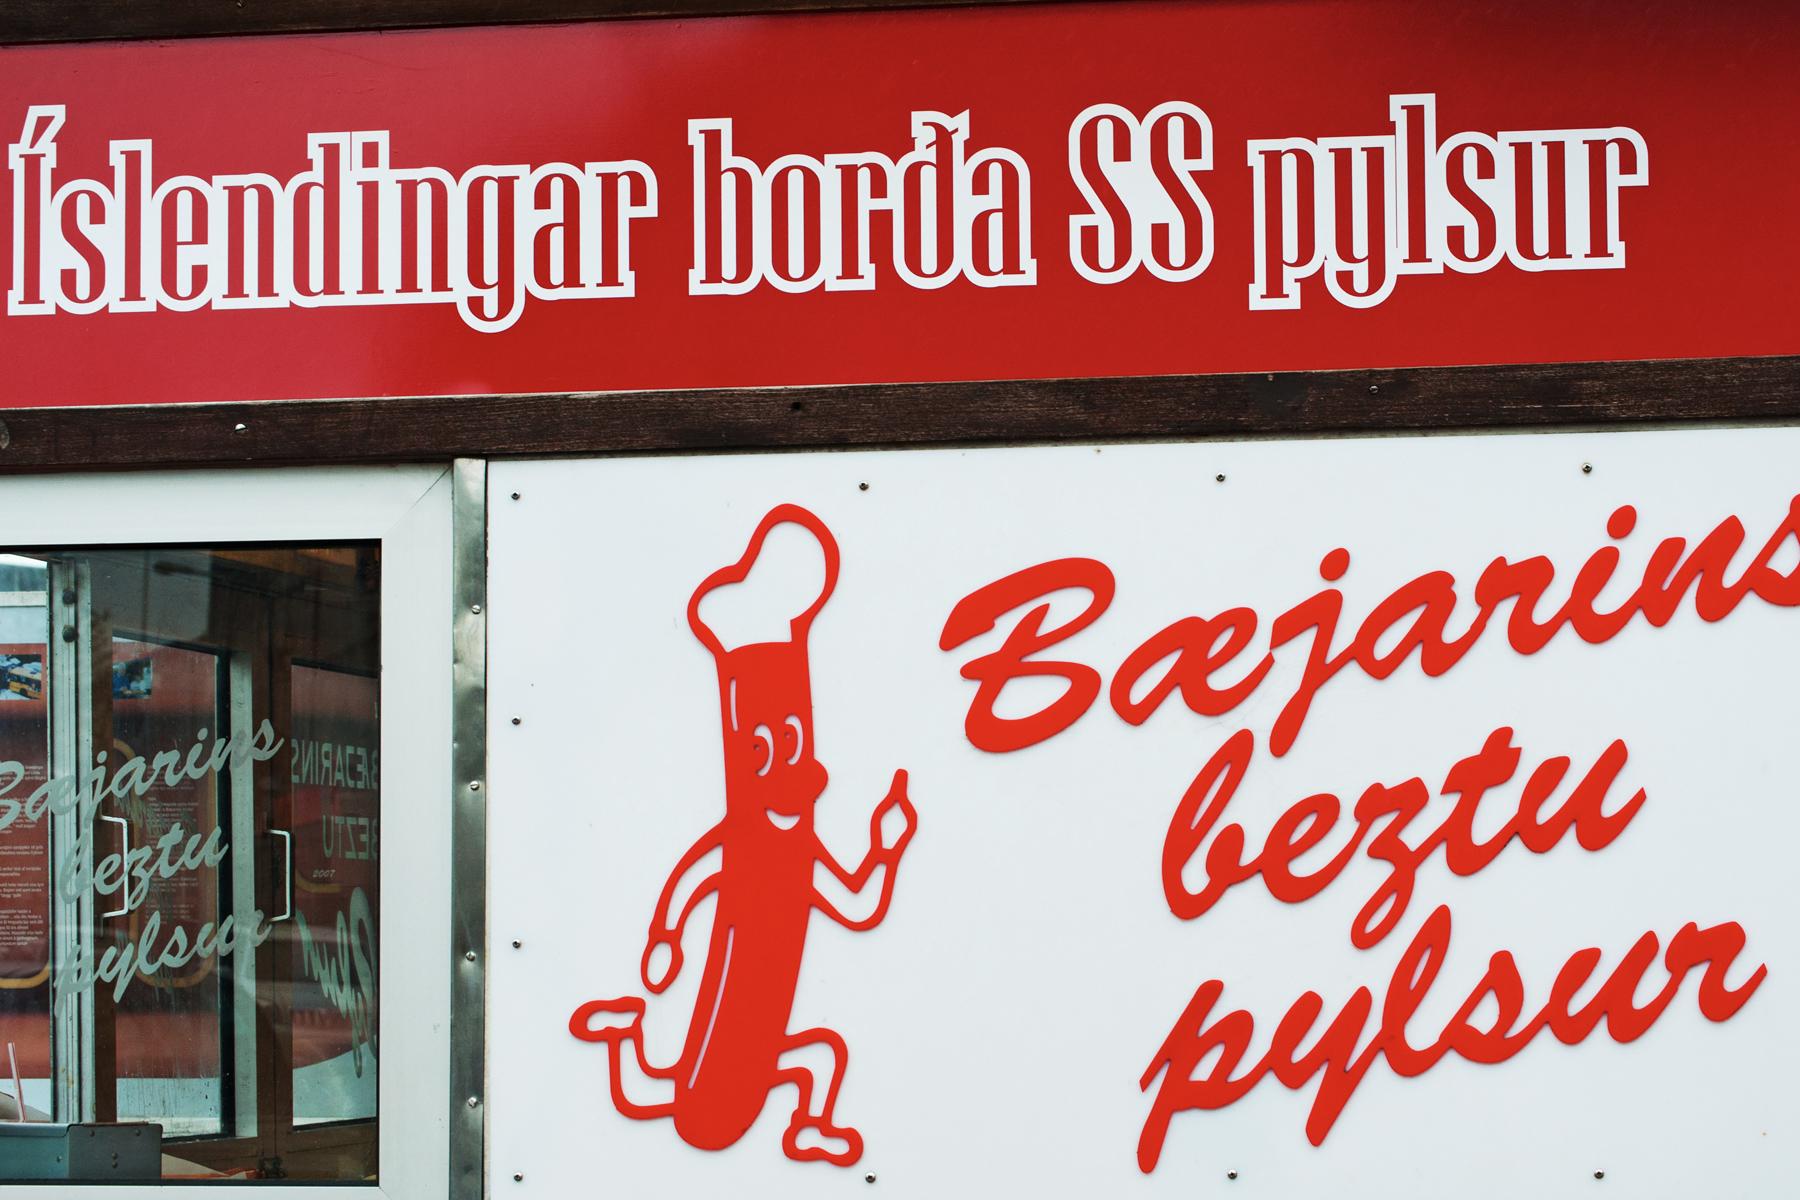 The World's Best Hot Dog Is in Iceland and Here's Why